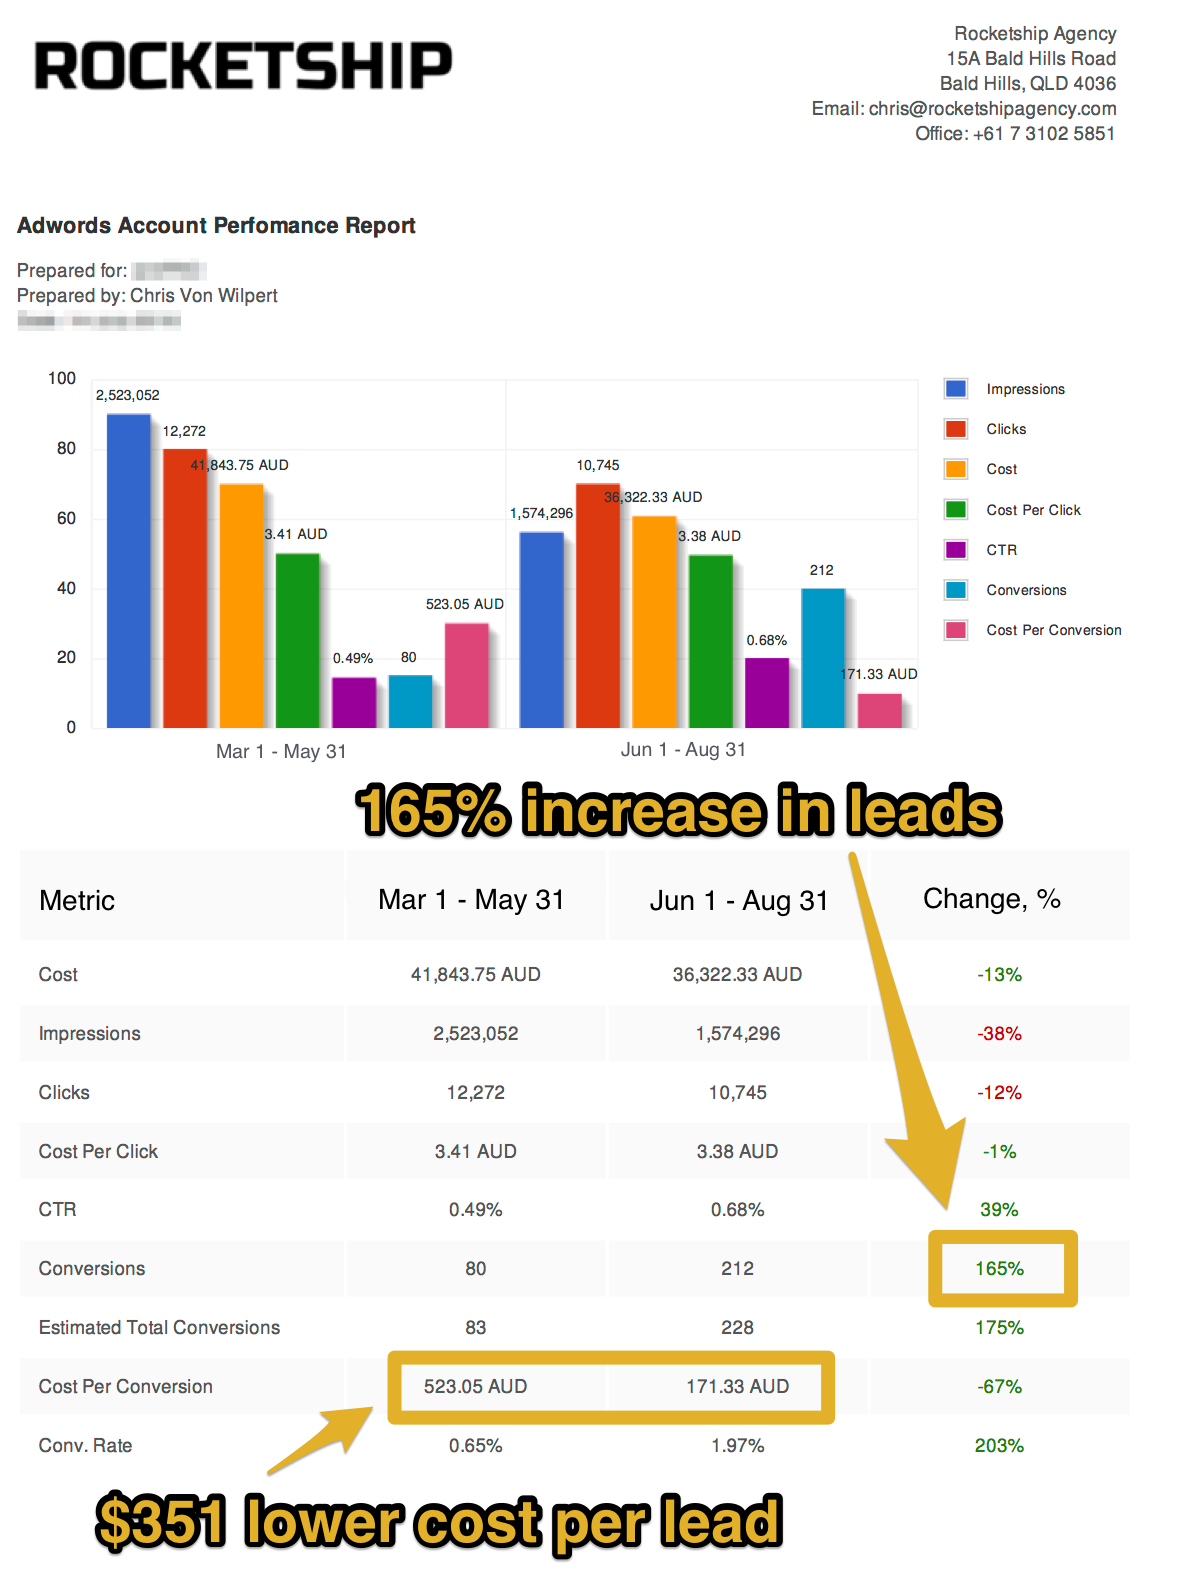 How we outcompete eBay on Google AdWords without a big ad budget